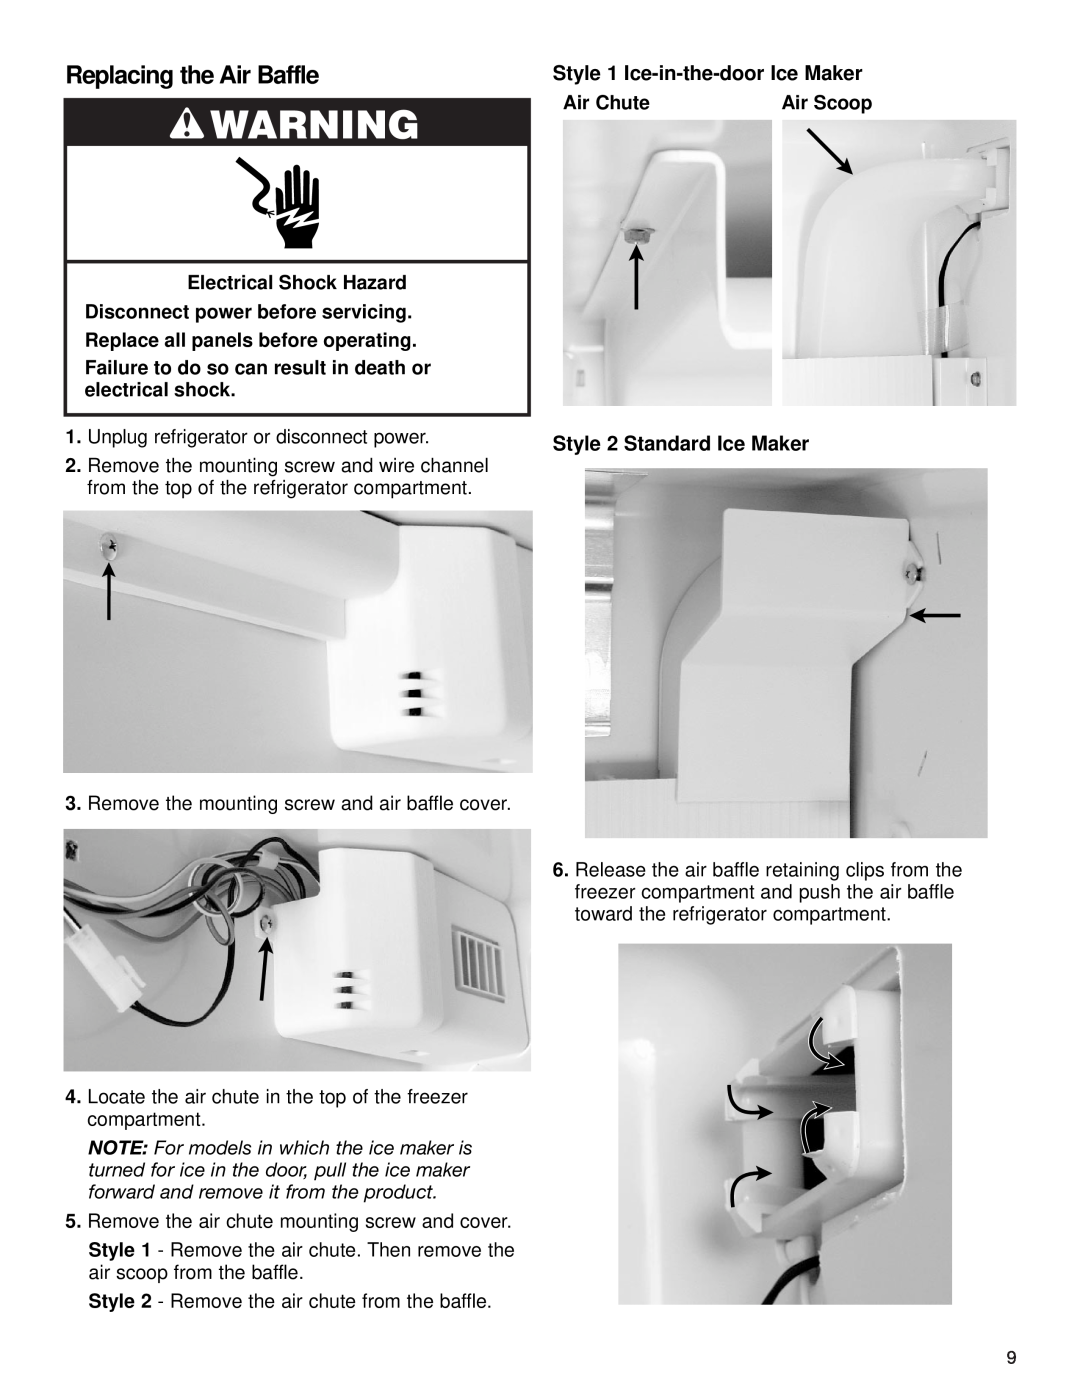 KitchenAid KSRA22FK manual Replacing the Air Baffle, Style 1 Ice-in-the-door Ice Maker, Air Chute, Air Scoop, w WARNING 